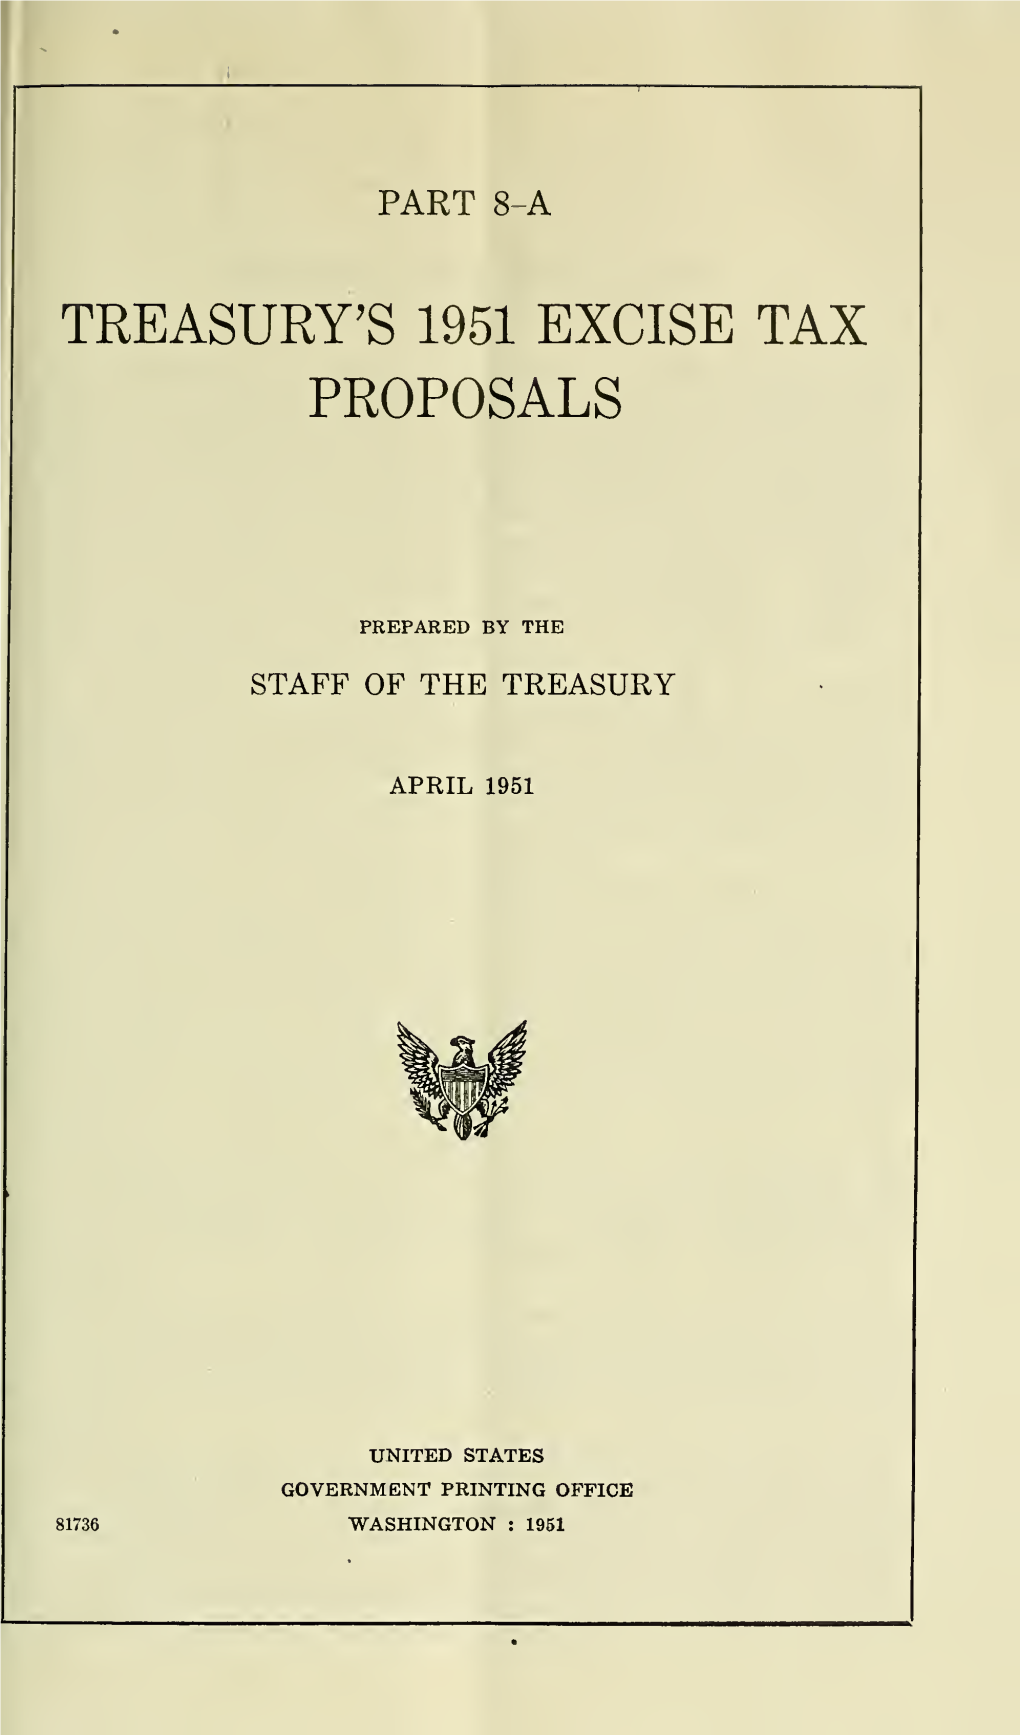 Treasury's 1951 Excise Tax Proposals